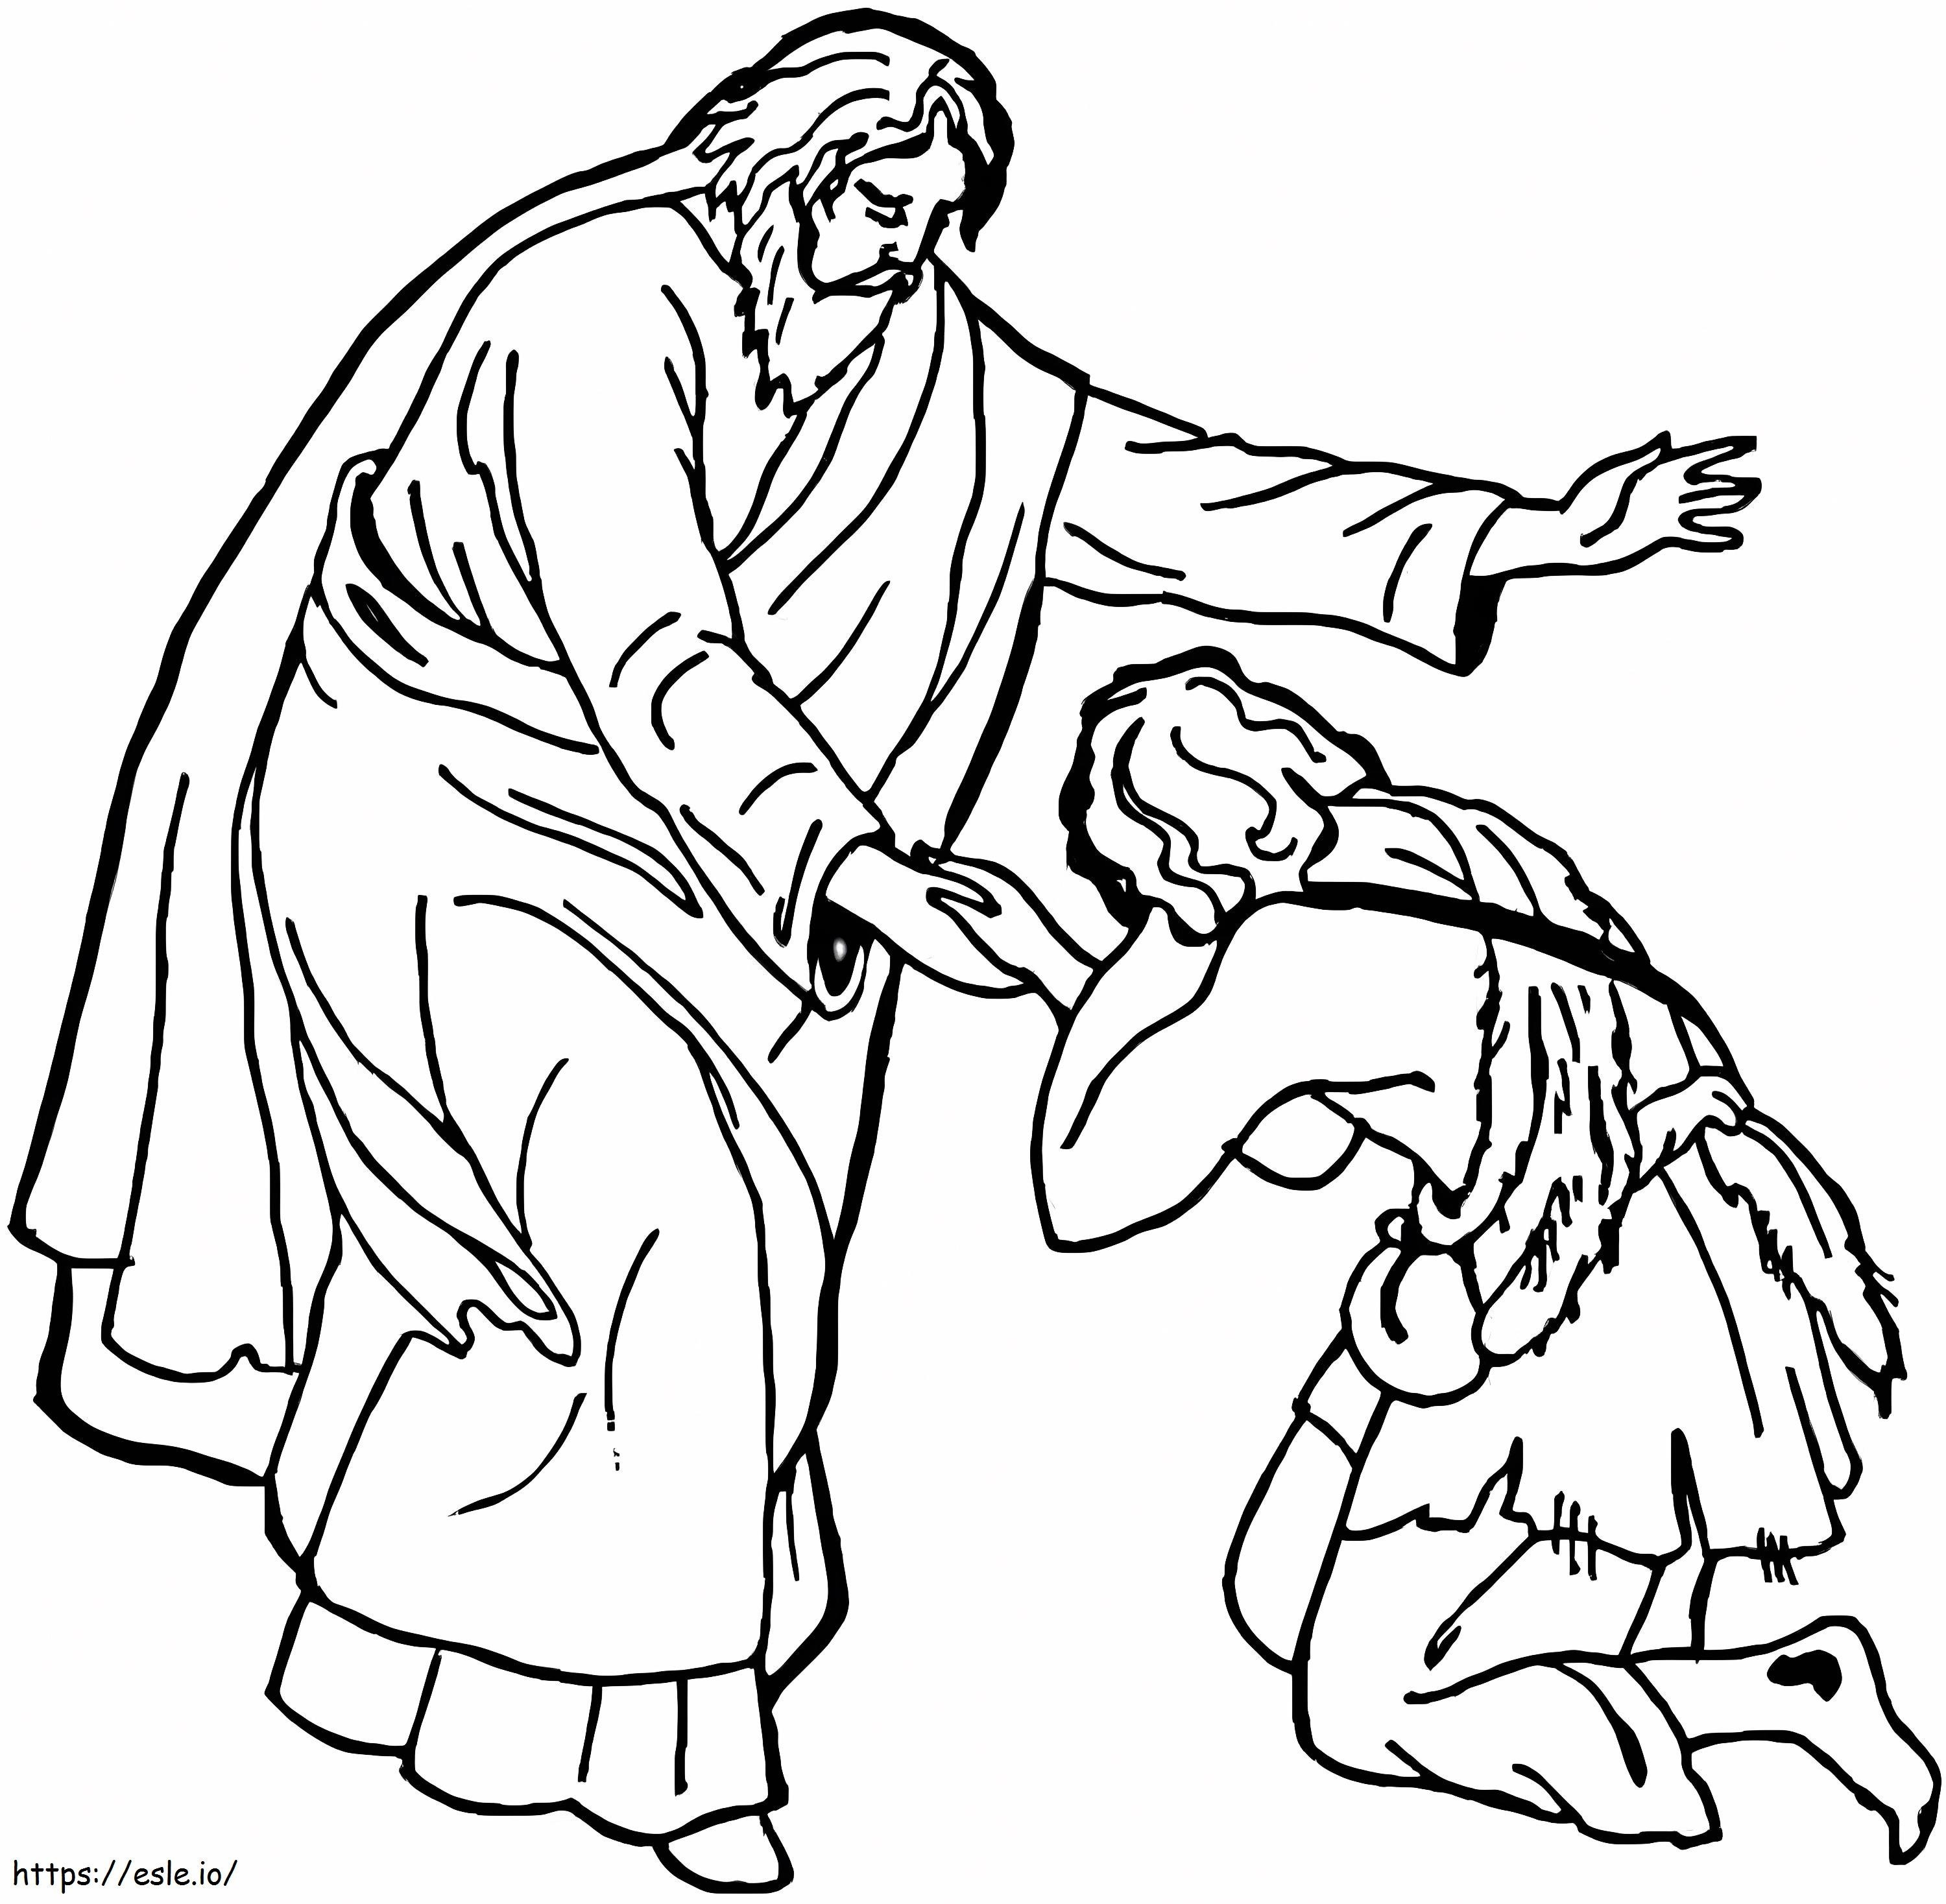 Prodigal Son 10 coloring page